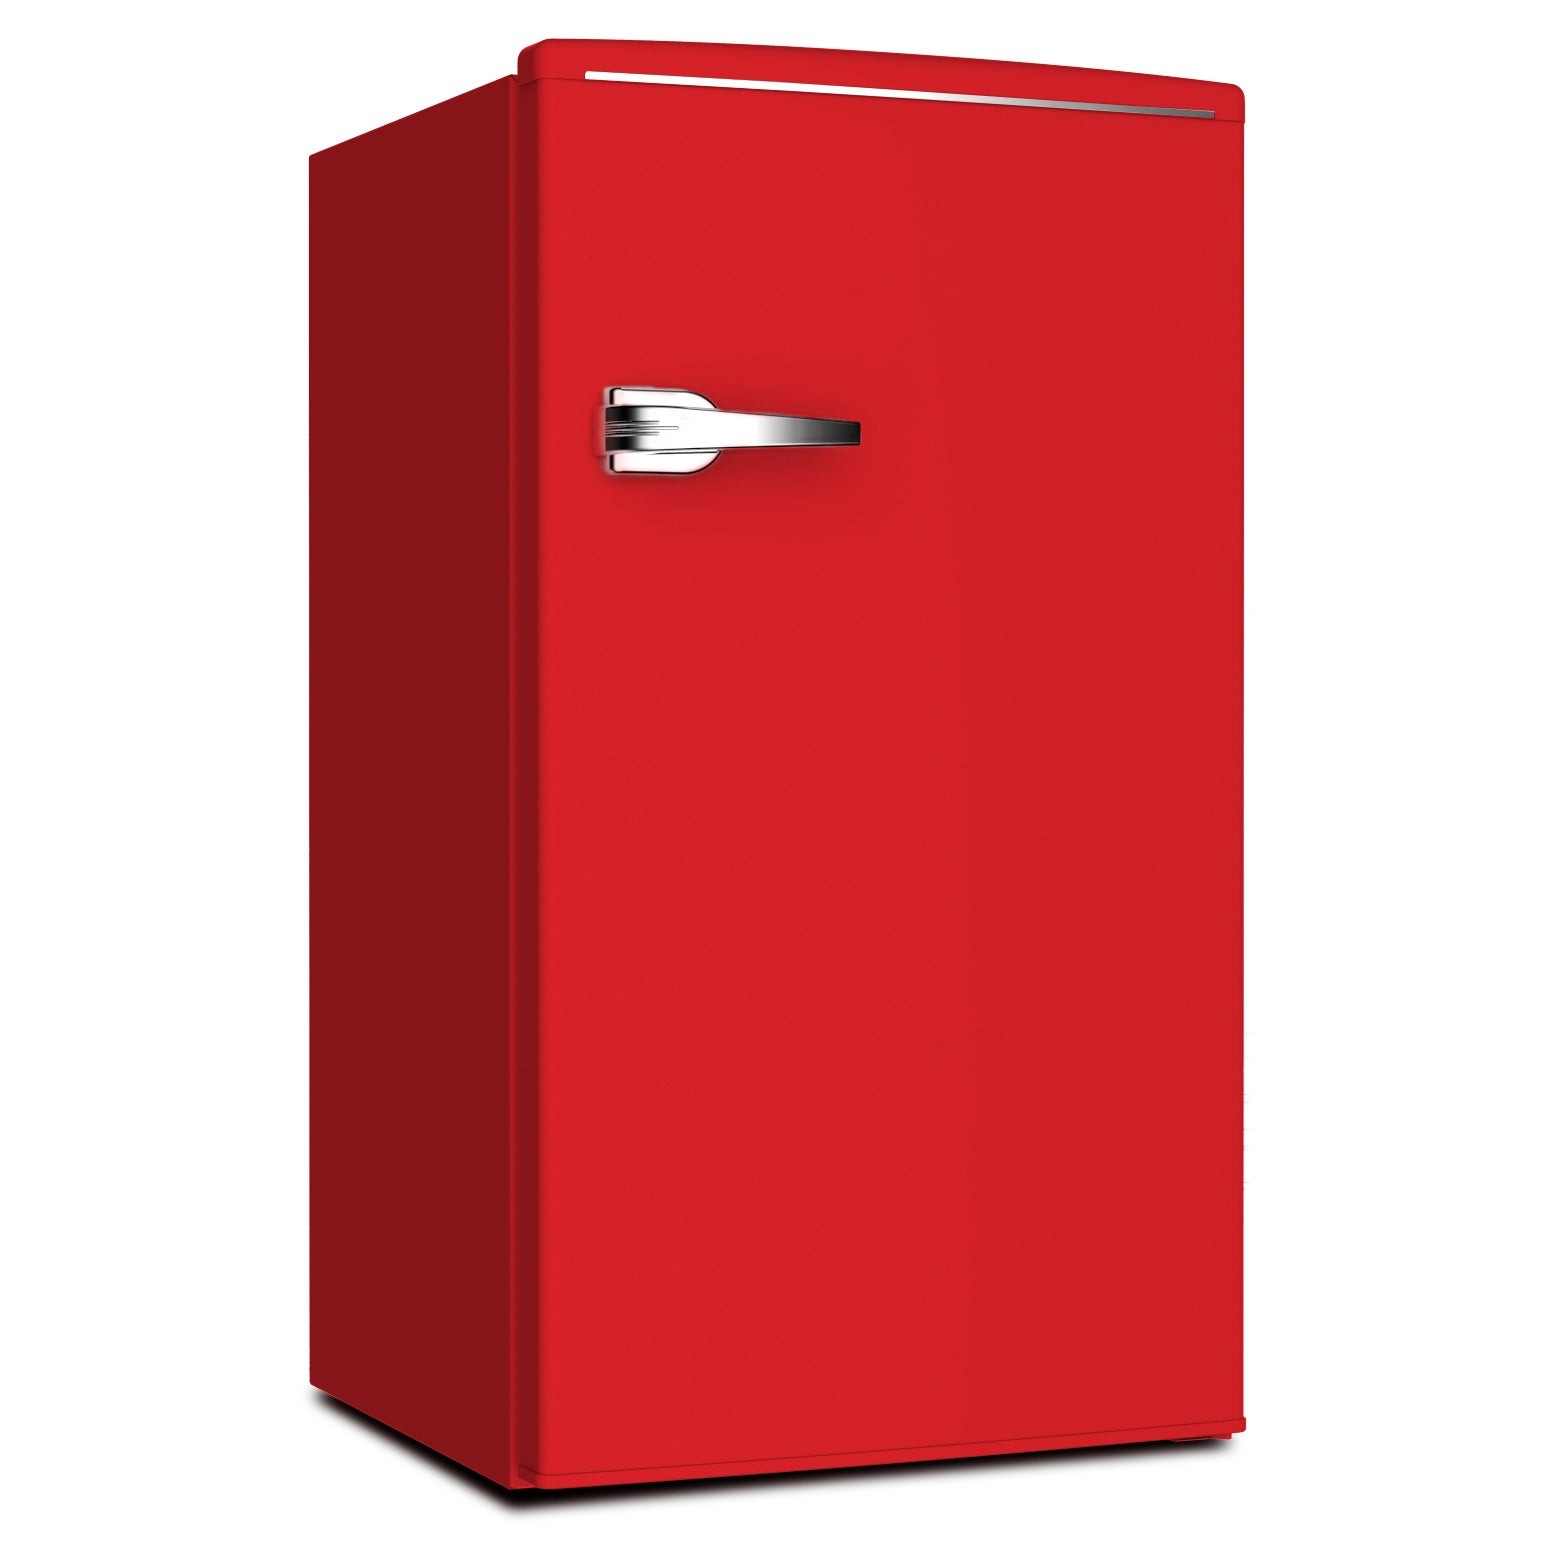 3.1 Cubic Foot Retro Compact Refrigerator Red